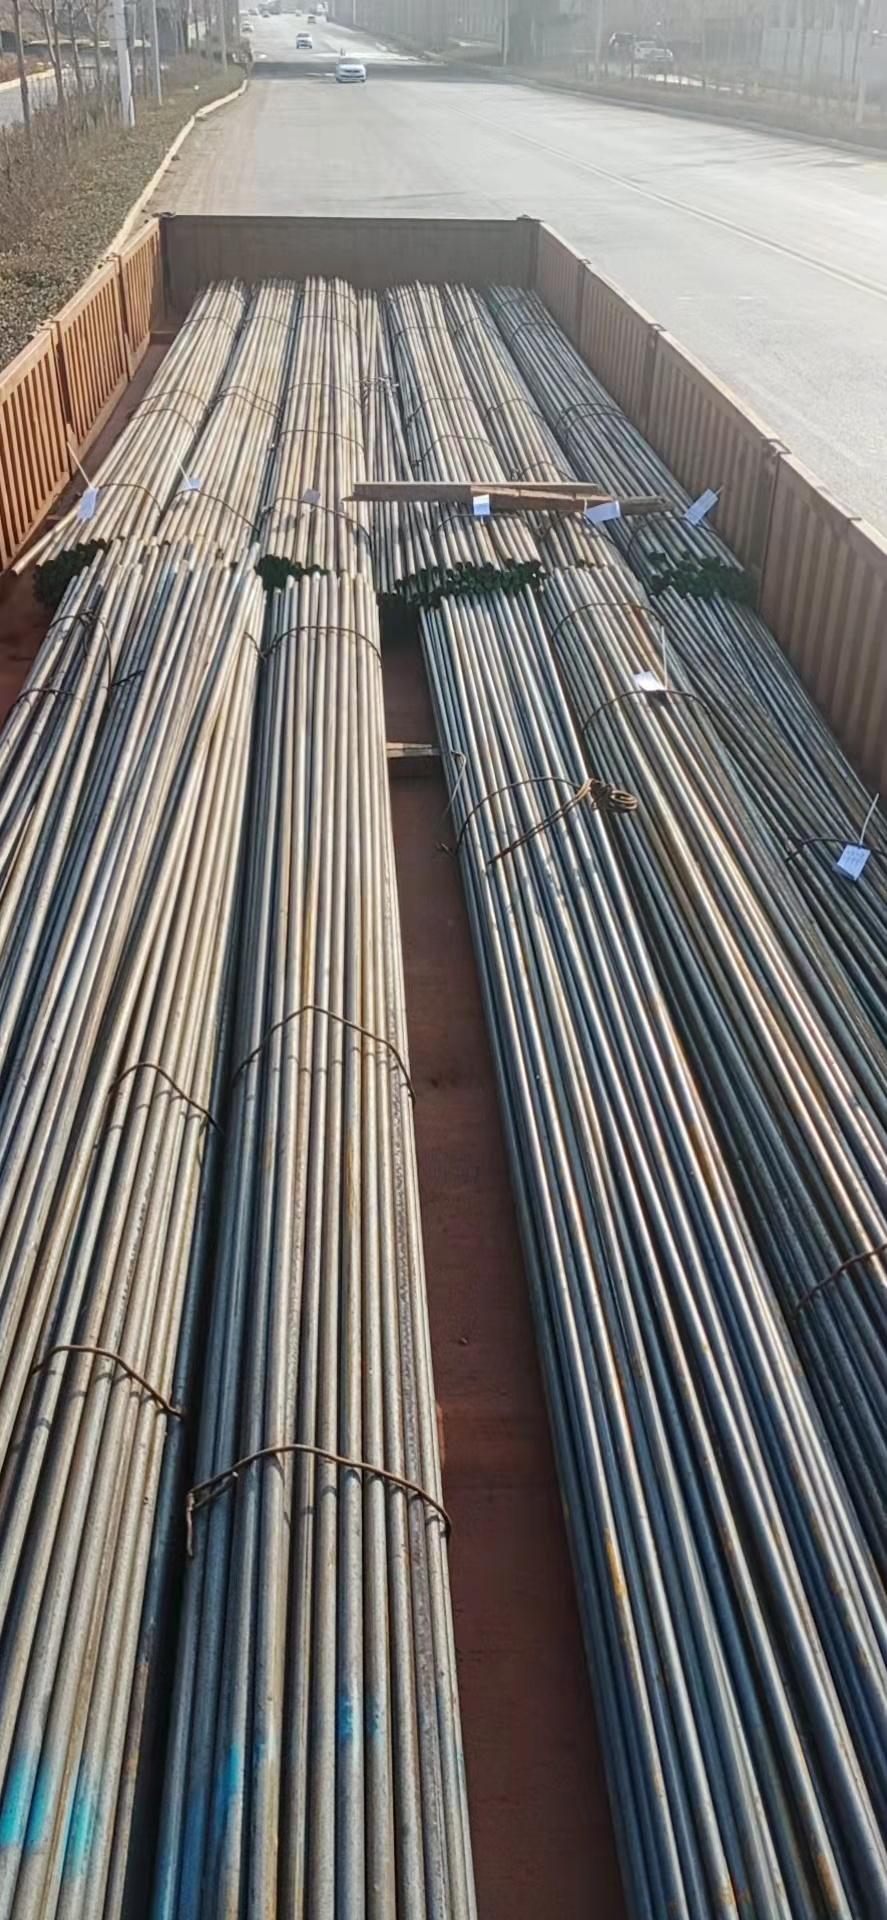 Hot Rolled 42CrMo4 Steel Price ASTM 4140 DIN 42CrMo4 Alloy Steel Round Bars